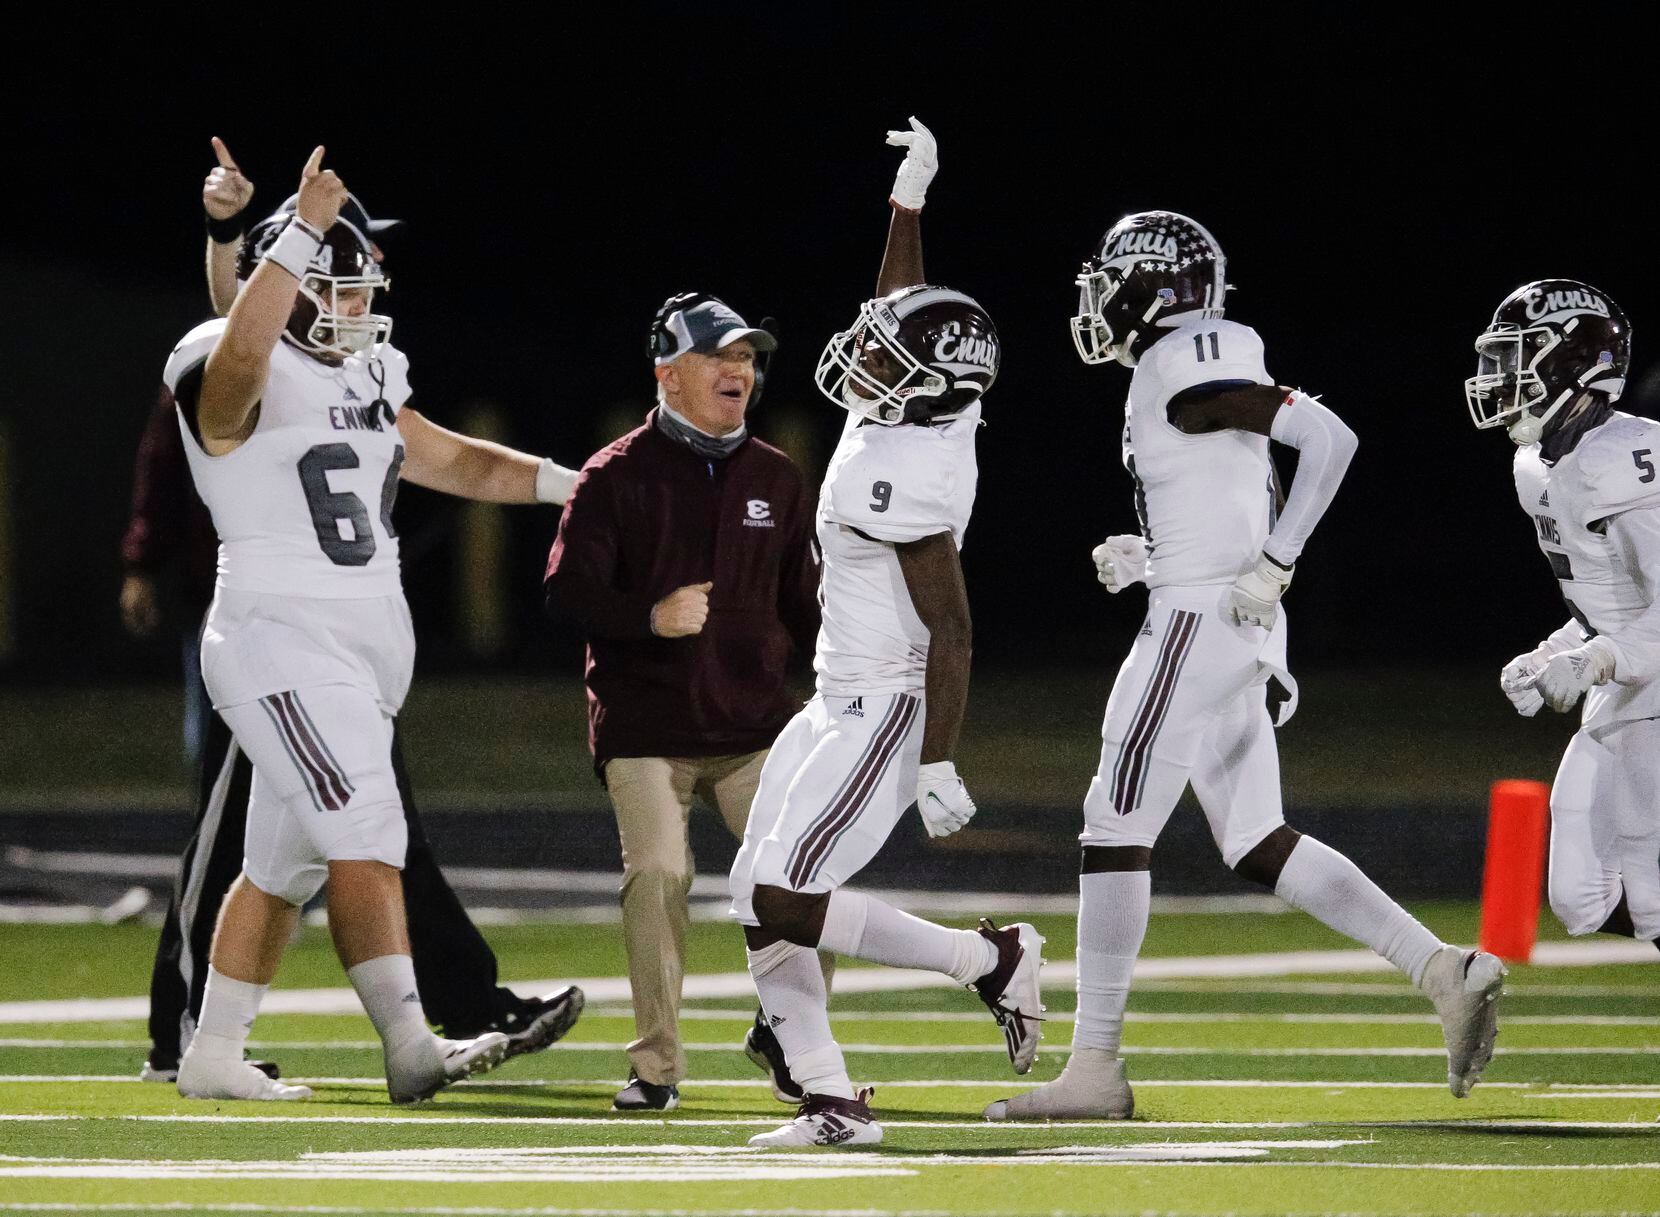 Ennis junior defensive back Devion Beasley (9) celebrates intercepting a pass during the first half of a high school playoff football game against North Forney in Forney, Thursday, November 19, 2020. (Brandon Wade/Special Contributor)